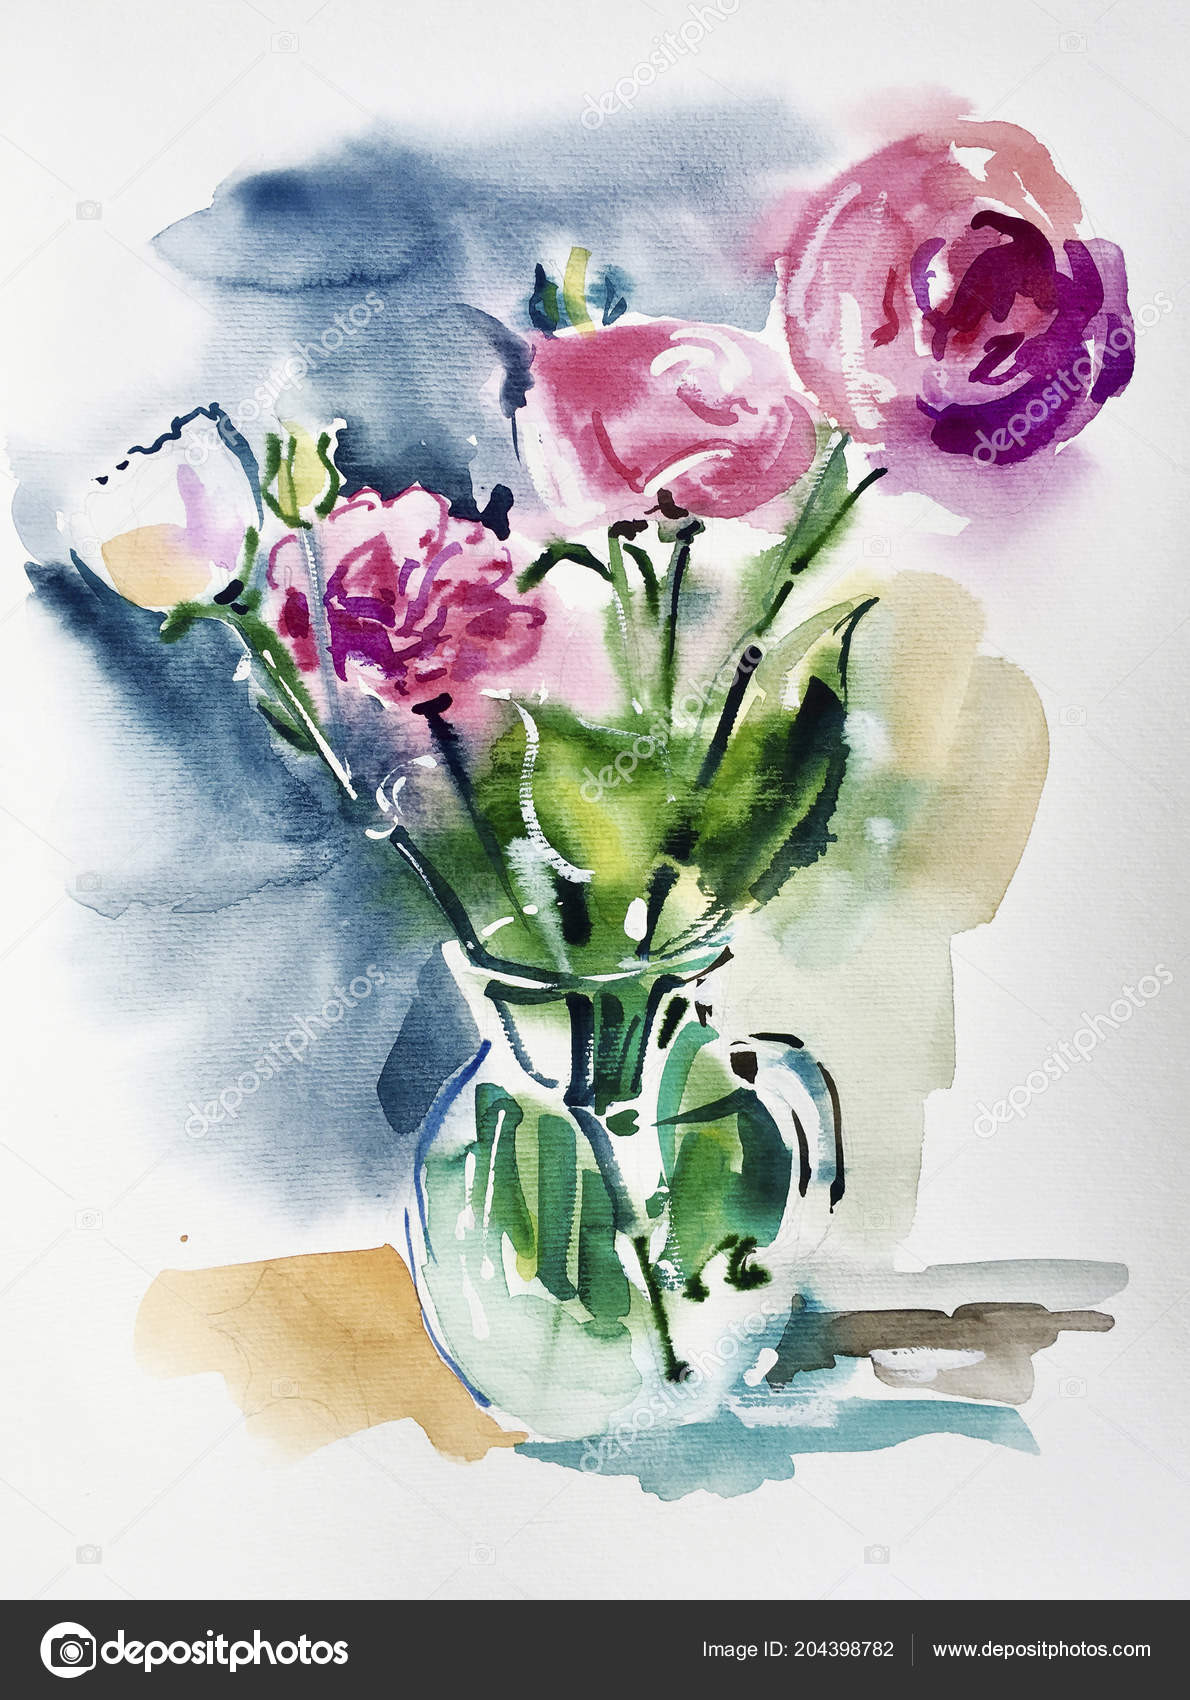 17 Wonderful Still Life Flowers In A Vase 2024 free download still life flowers in a vase of watercolor artwork of pink flowers in a glass vase stock with original watercolor artwork of pink flowers in a glass vase still life illustration fotografie o